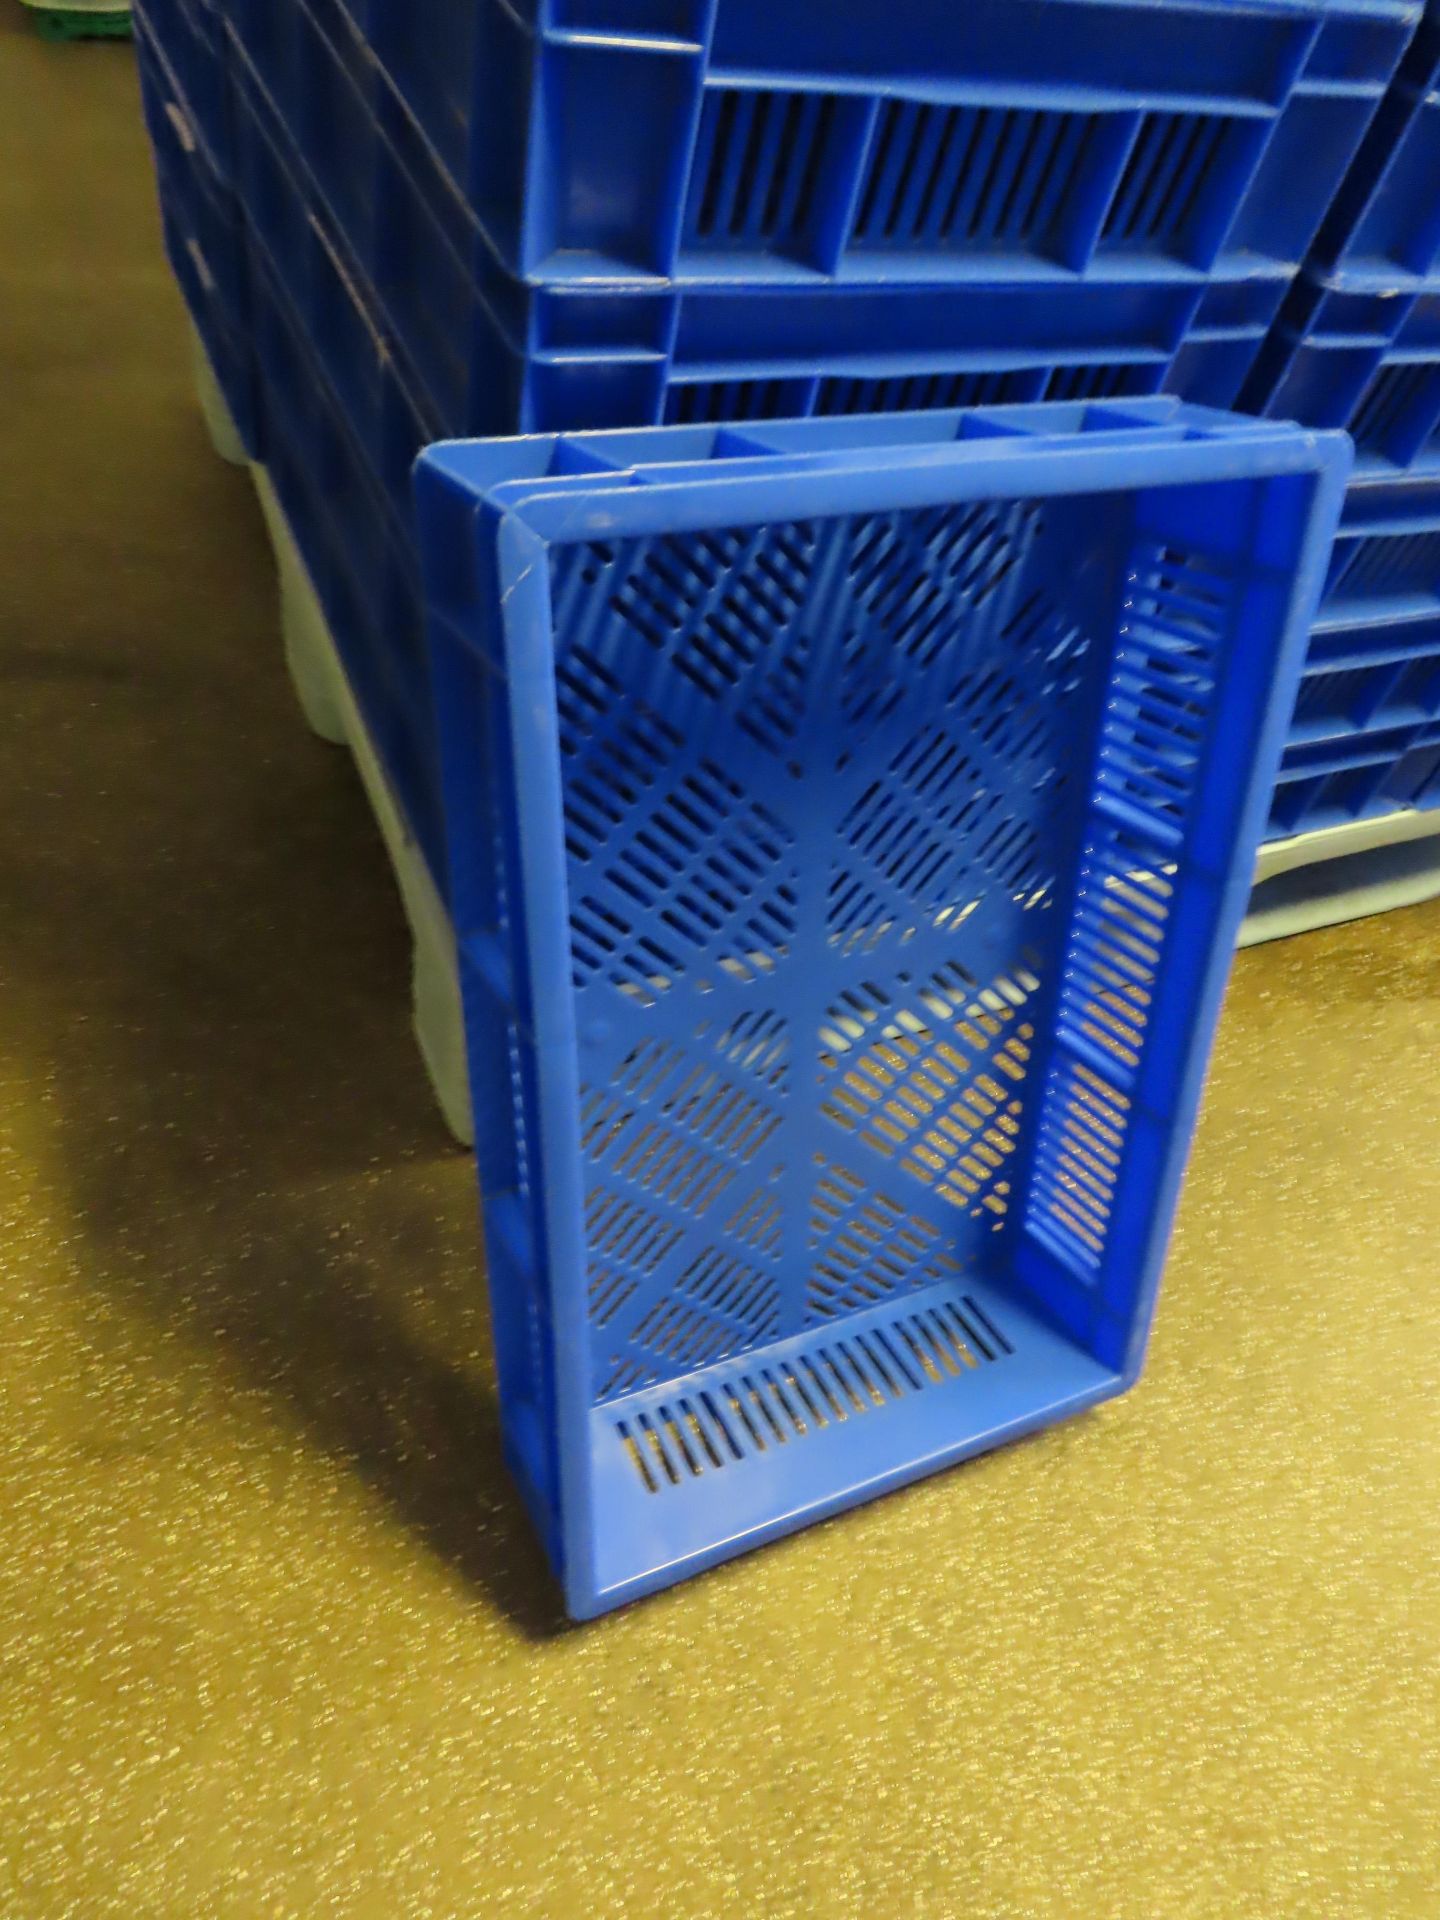 6 X PALLETS OF TRAYS (APPROX. 80 BLUE TRAYS ON EACH PALLET). - Image 4 of 5